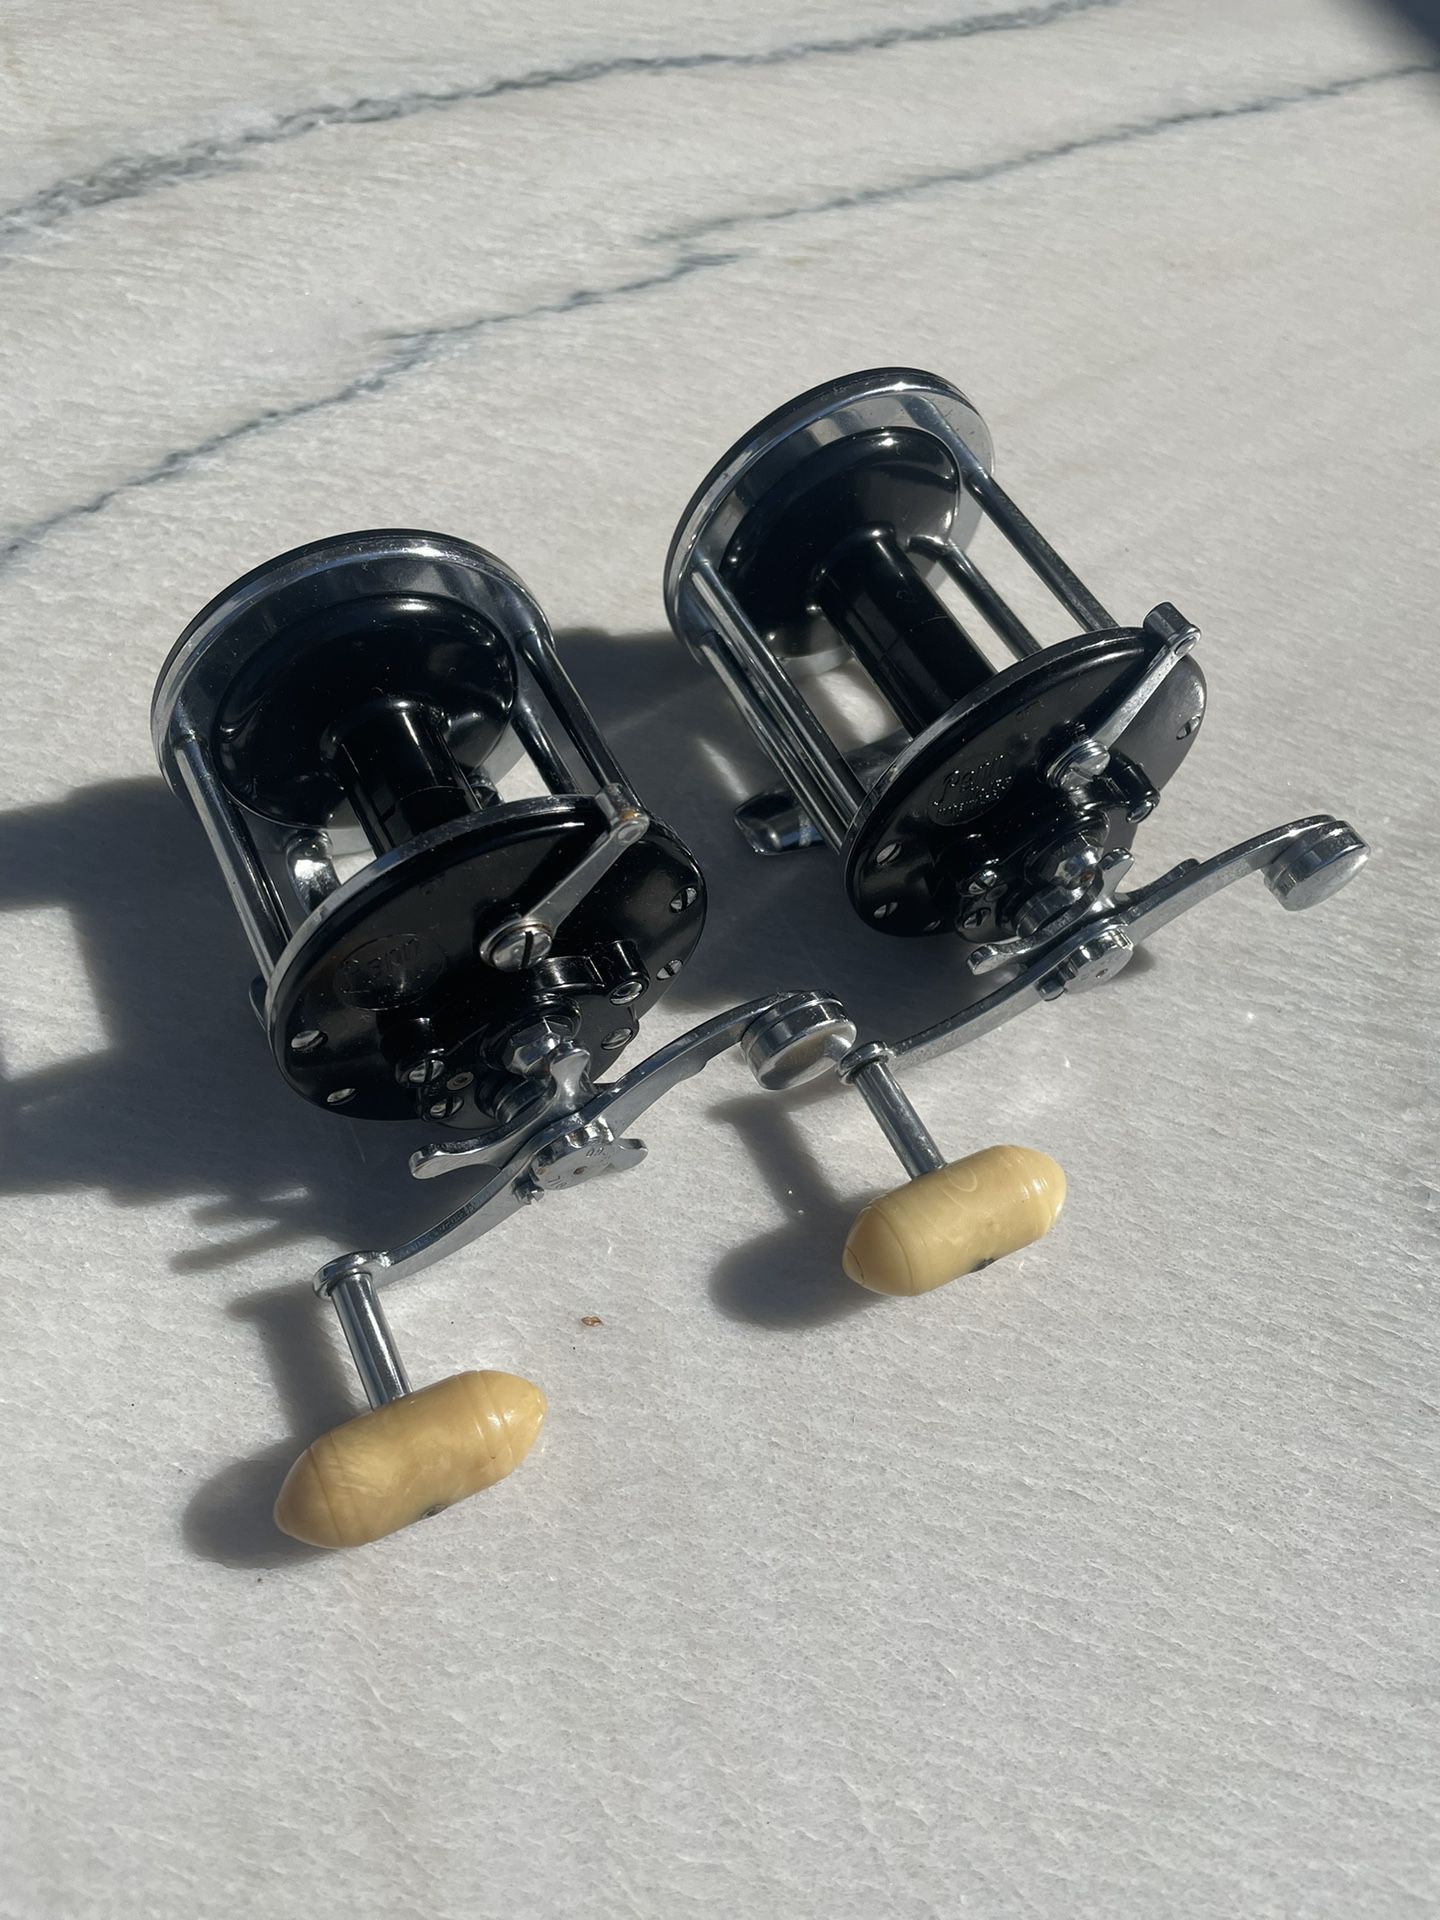 Matching Penn 155 And 160 Fishing Reels - Cleaned And Serviced With HT-100 Drags